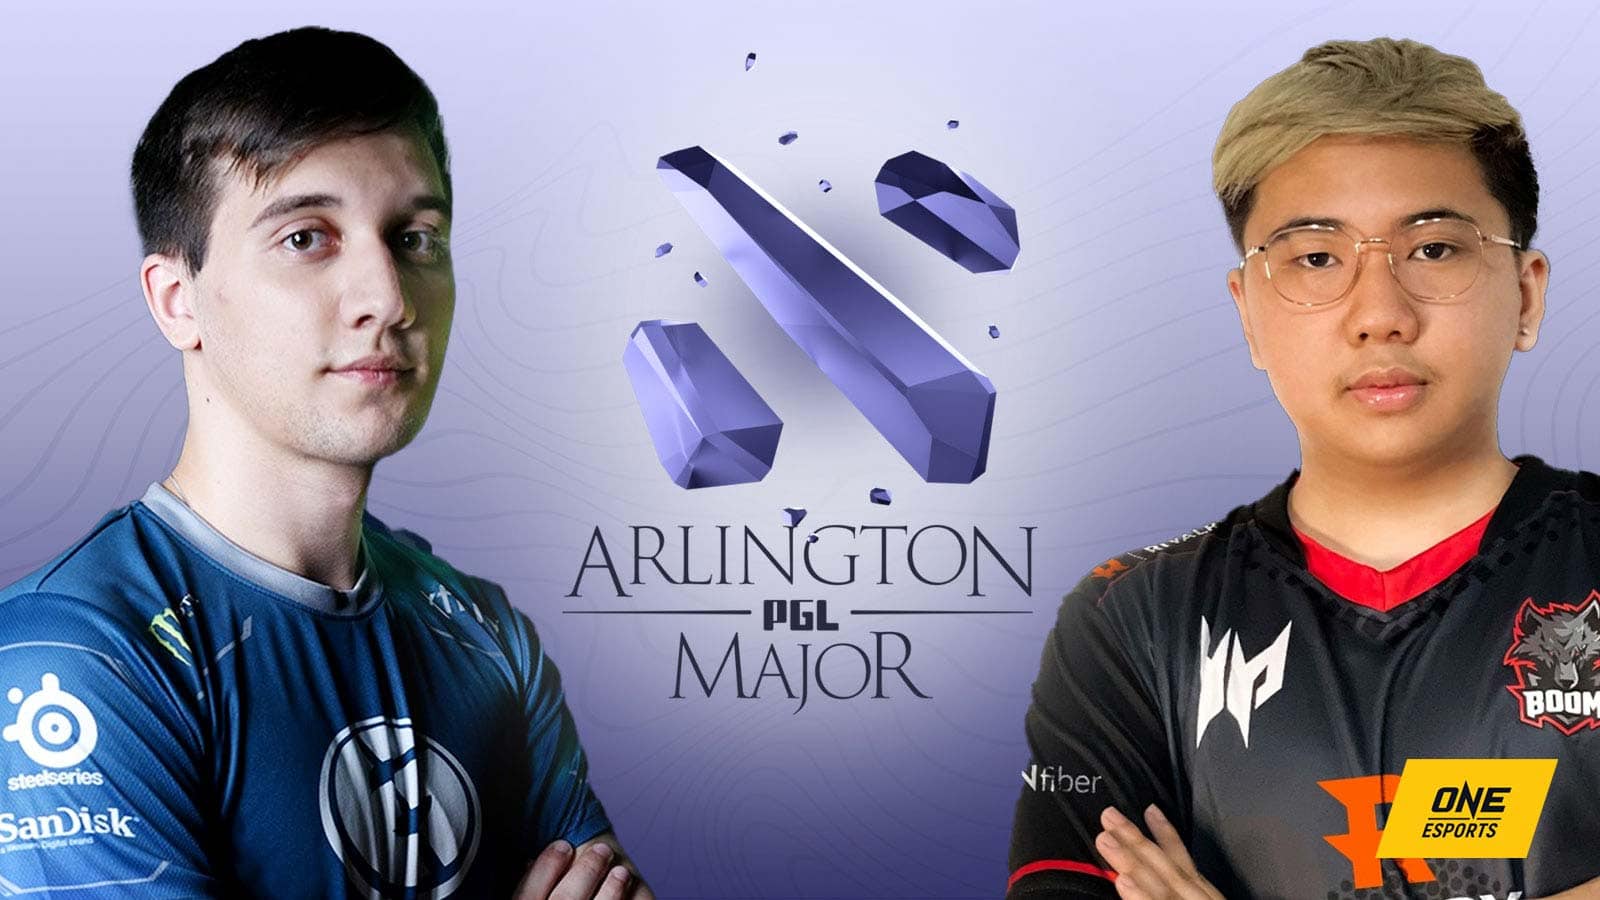 Dota 2 PGL Arlington Major Schedule, results, teams, where to watch ONE Esports